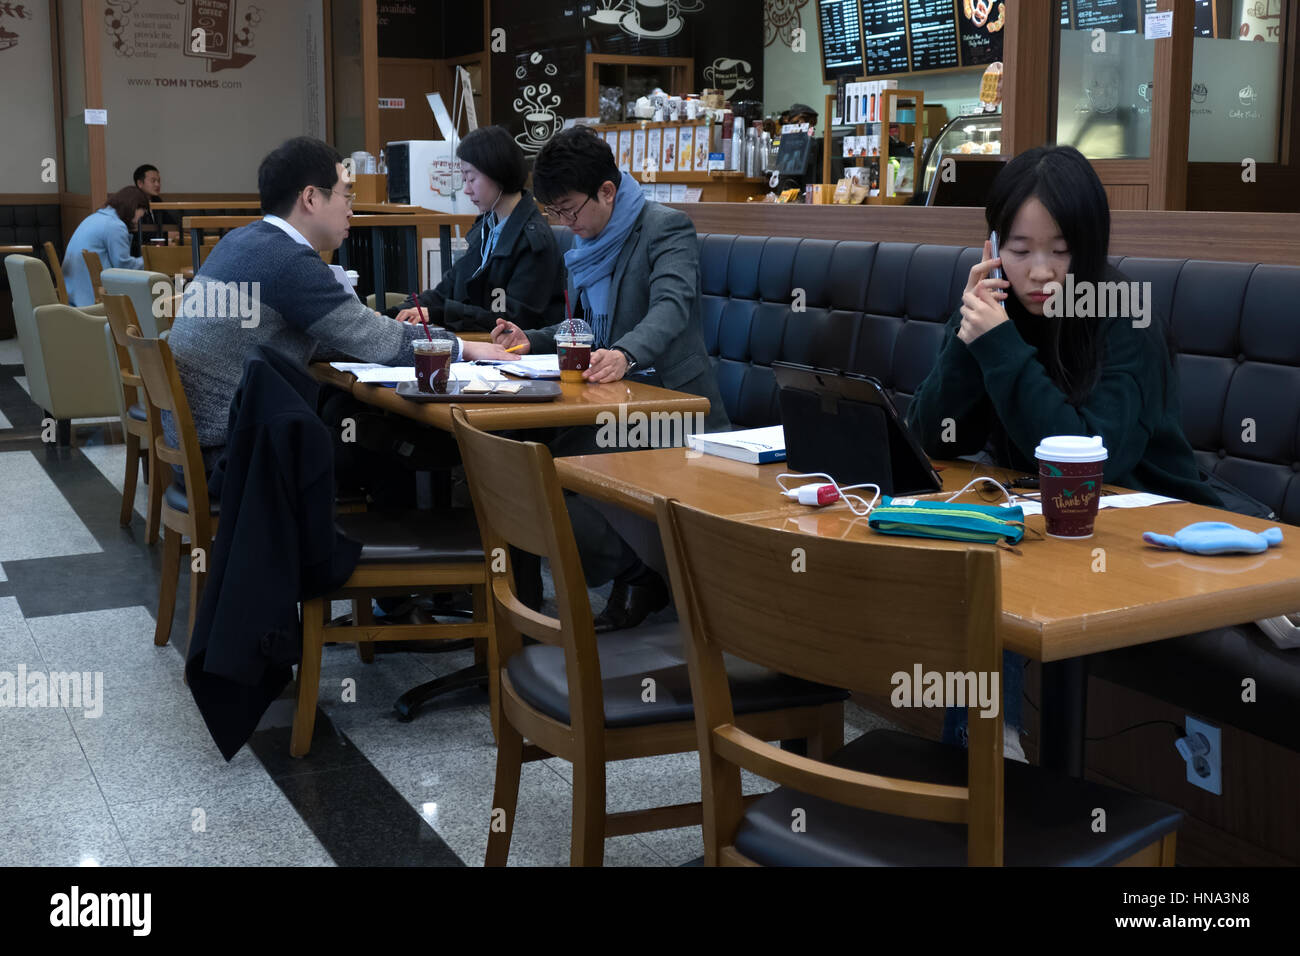 Young Korean student studying with phone and ipad tablet, Asian people working in a cafeteria, busy businessmen with papers. Seoul, South Korea, Asia Stock Photo